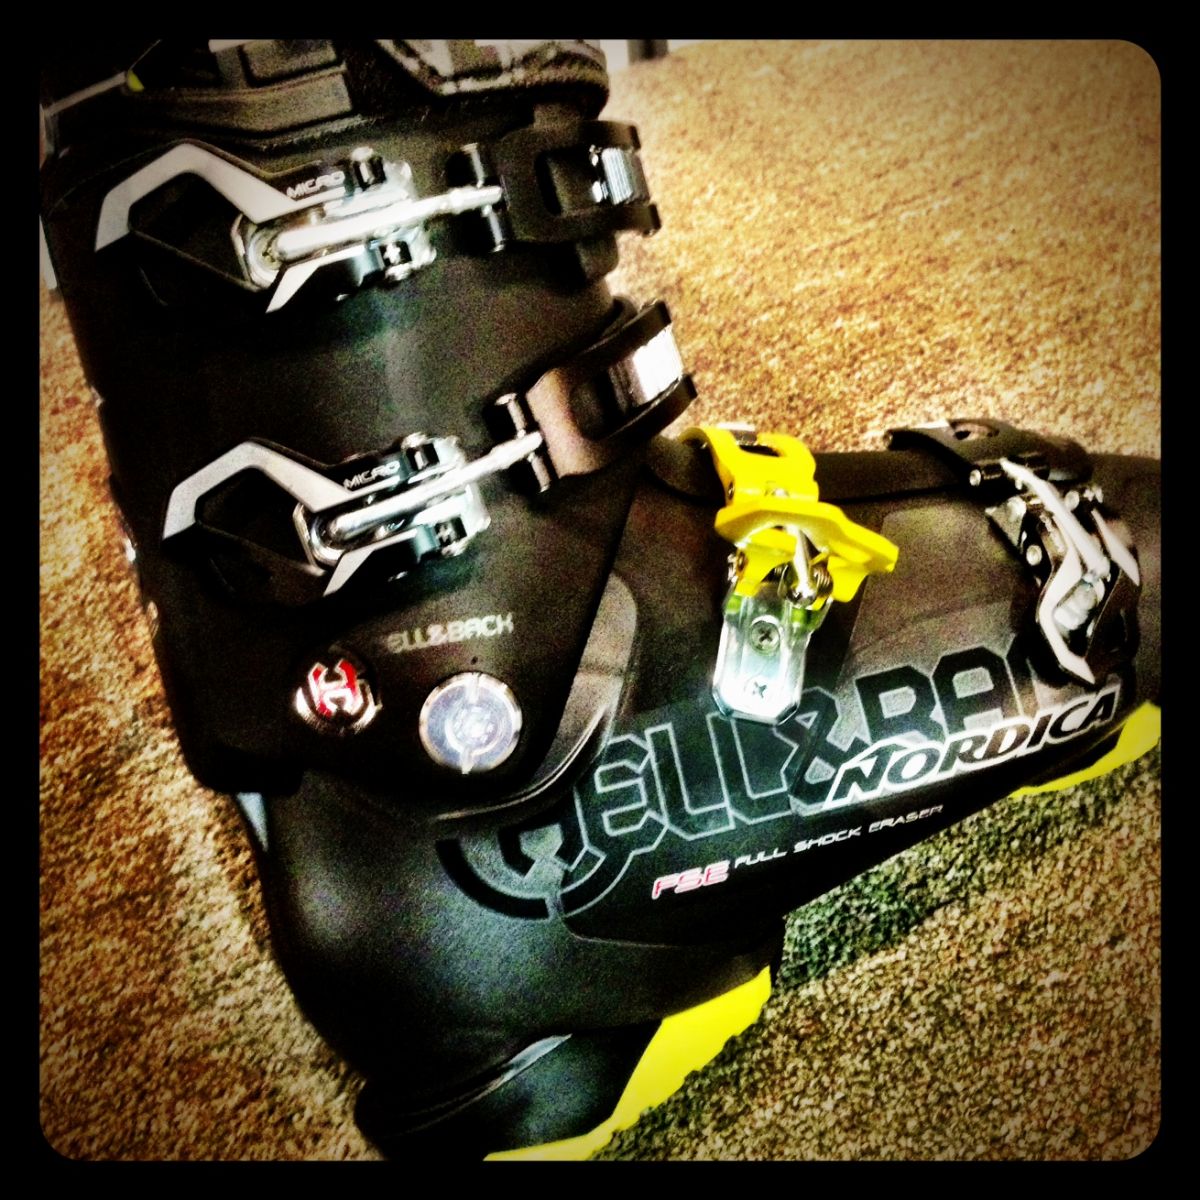 Nordica Hell and Back Ski Boots, Ski Boot Review